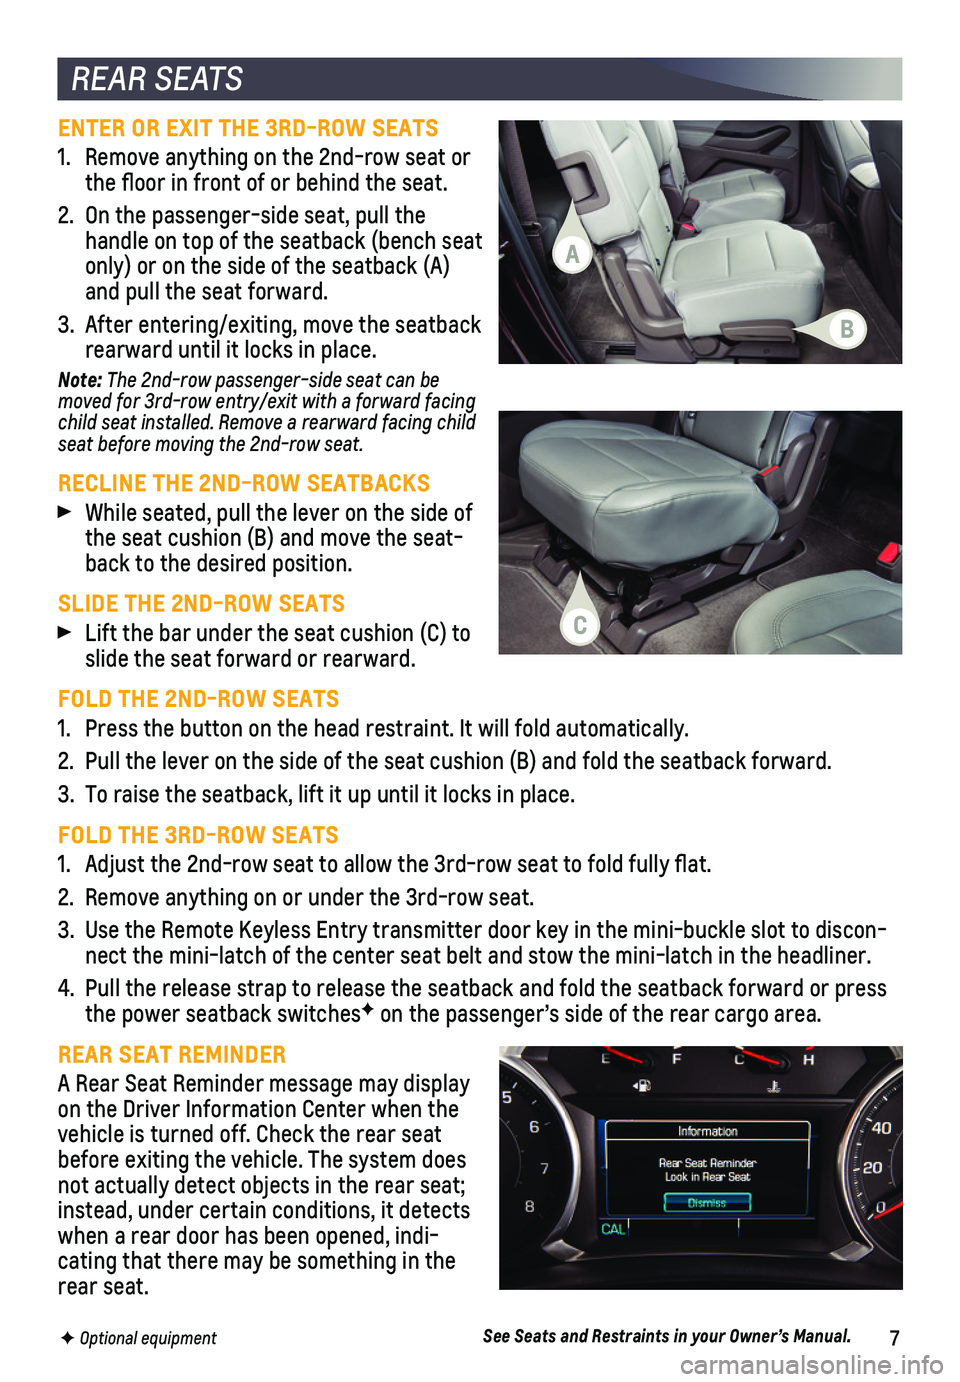 CHEVROLET TRAVERSE 2019  Get To Know Guide 7F Optional equipment  
REAR SEATS
ENTER OR EXIT THE 3RD-ROW SEATS
1. Remove anything on the 2nd-row seat or the floor in front of or behind the seat.
2. On the passenger-side seat, pull the handle on